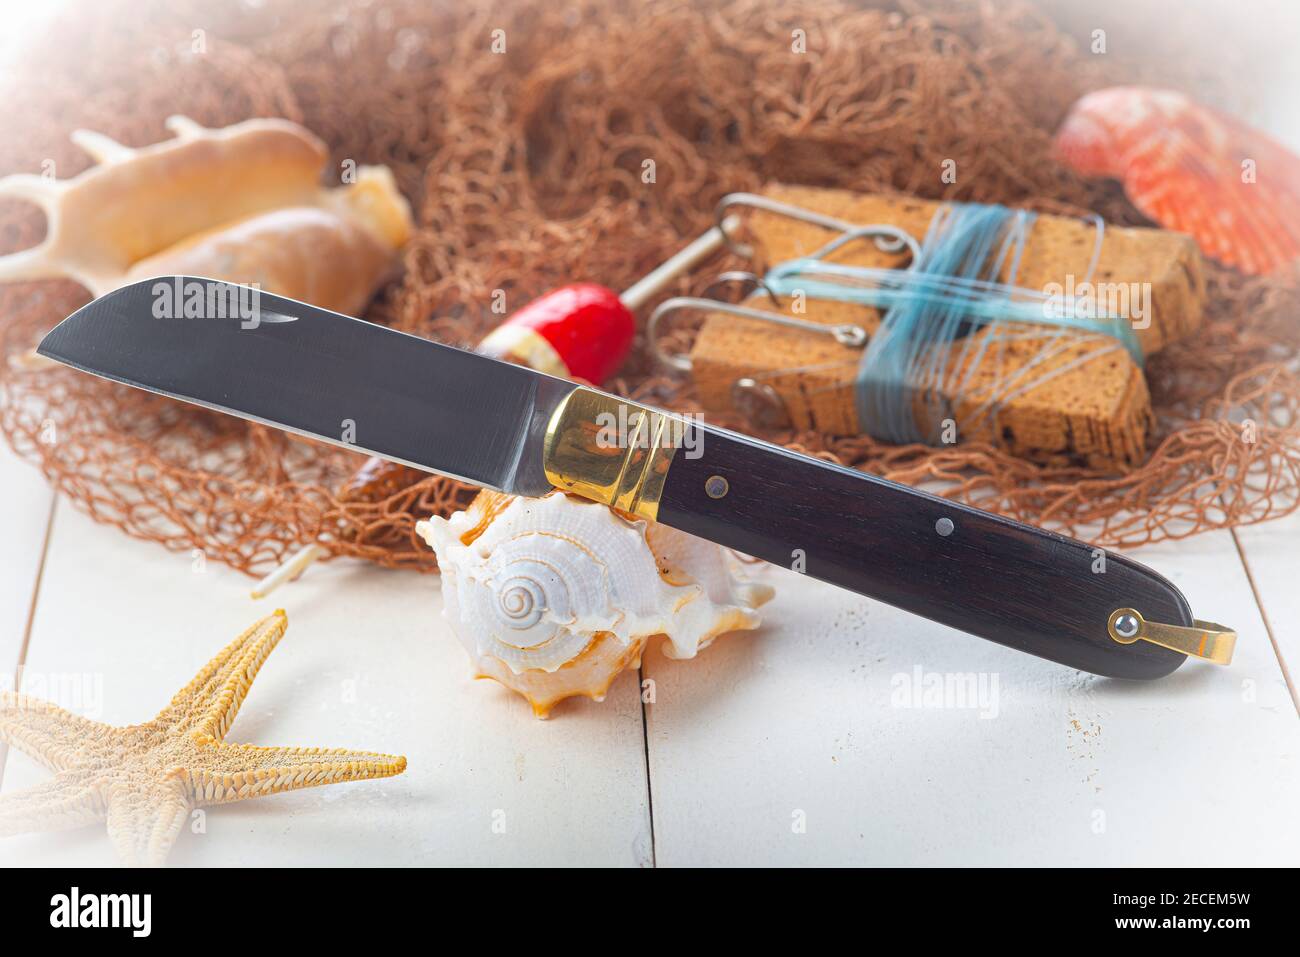 https://c8.alamy.com/comp/2ECEM5W/vintage-still-life-about-fishing-with-a-pipe-and-a-sailor-knife-2ECEM5W.jpg